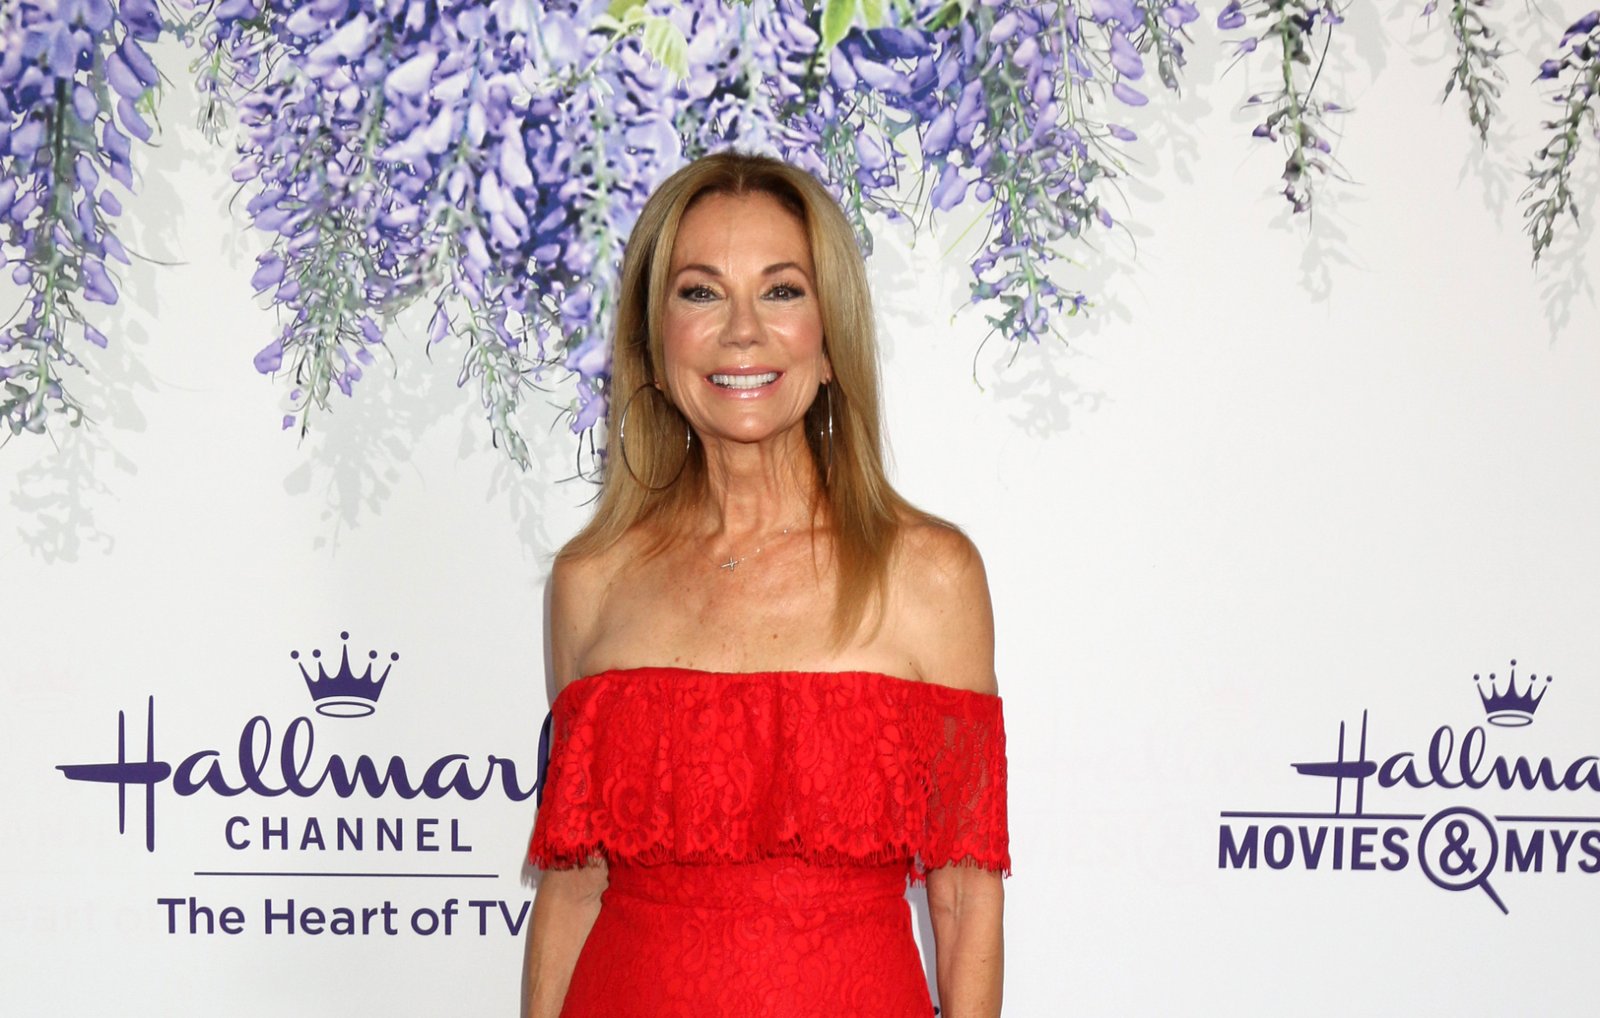 Kathie Lee Gifford Measurements: Height, Weight & More